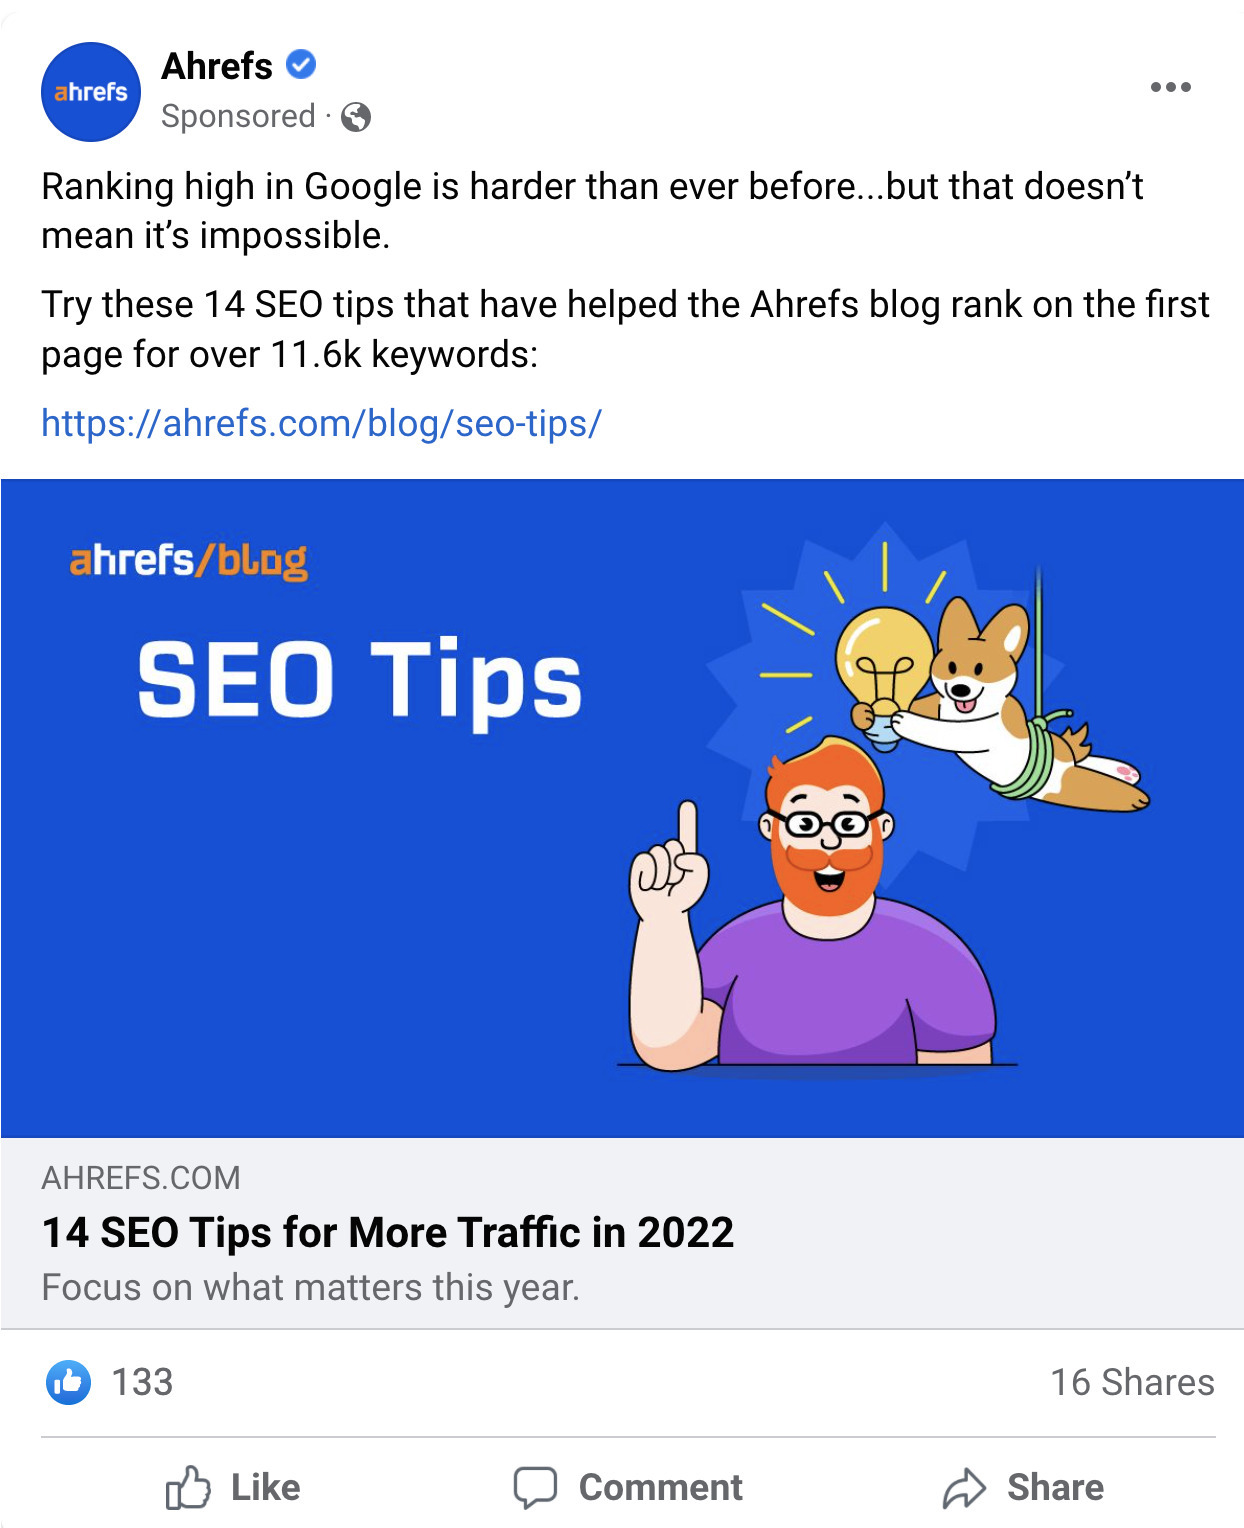 An example of a Facebook Ad from Ahrefs